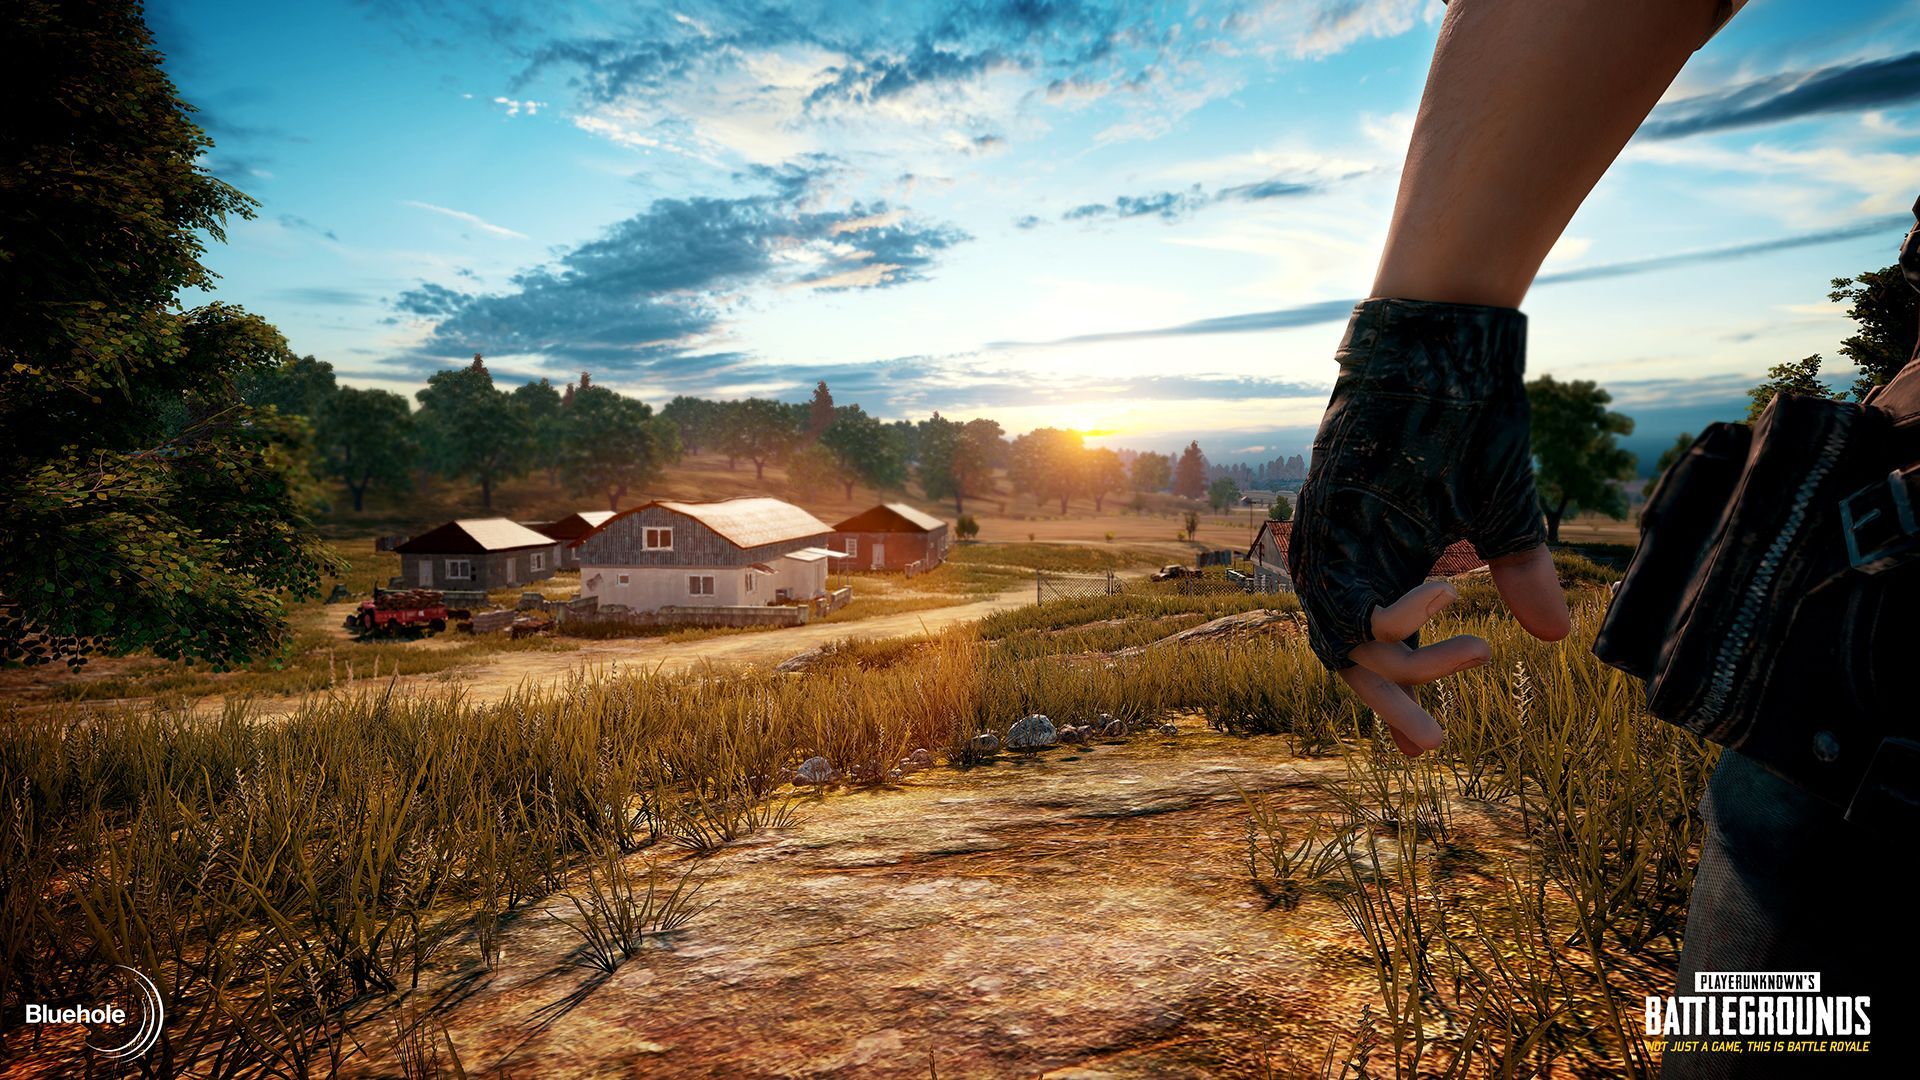 Pubg Background On Wallpaper 1080p HD. Best wallpaper android